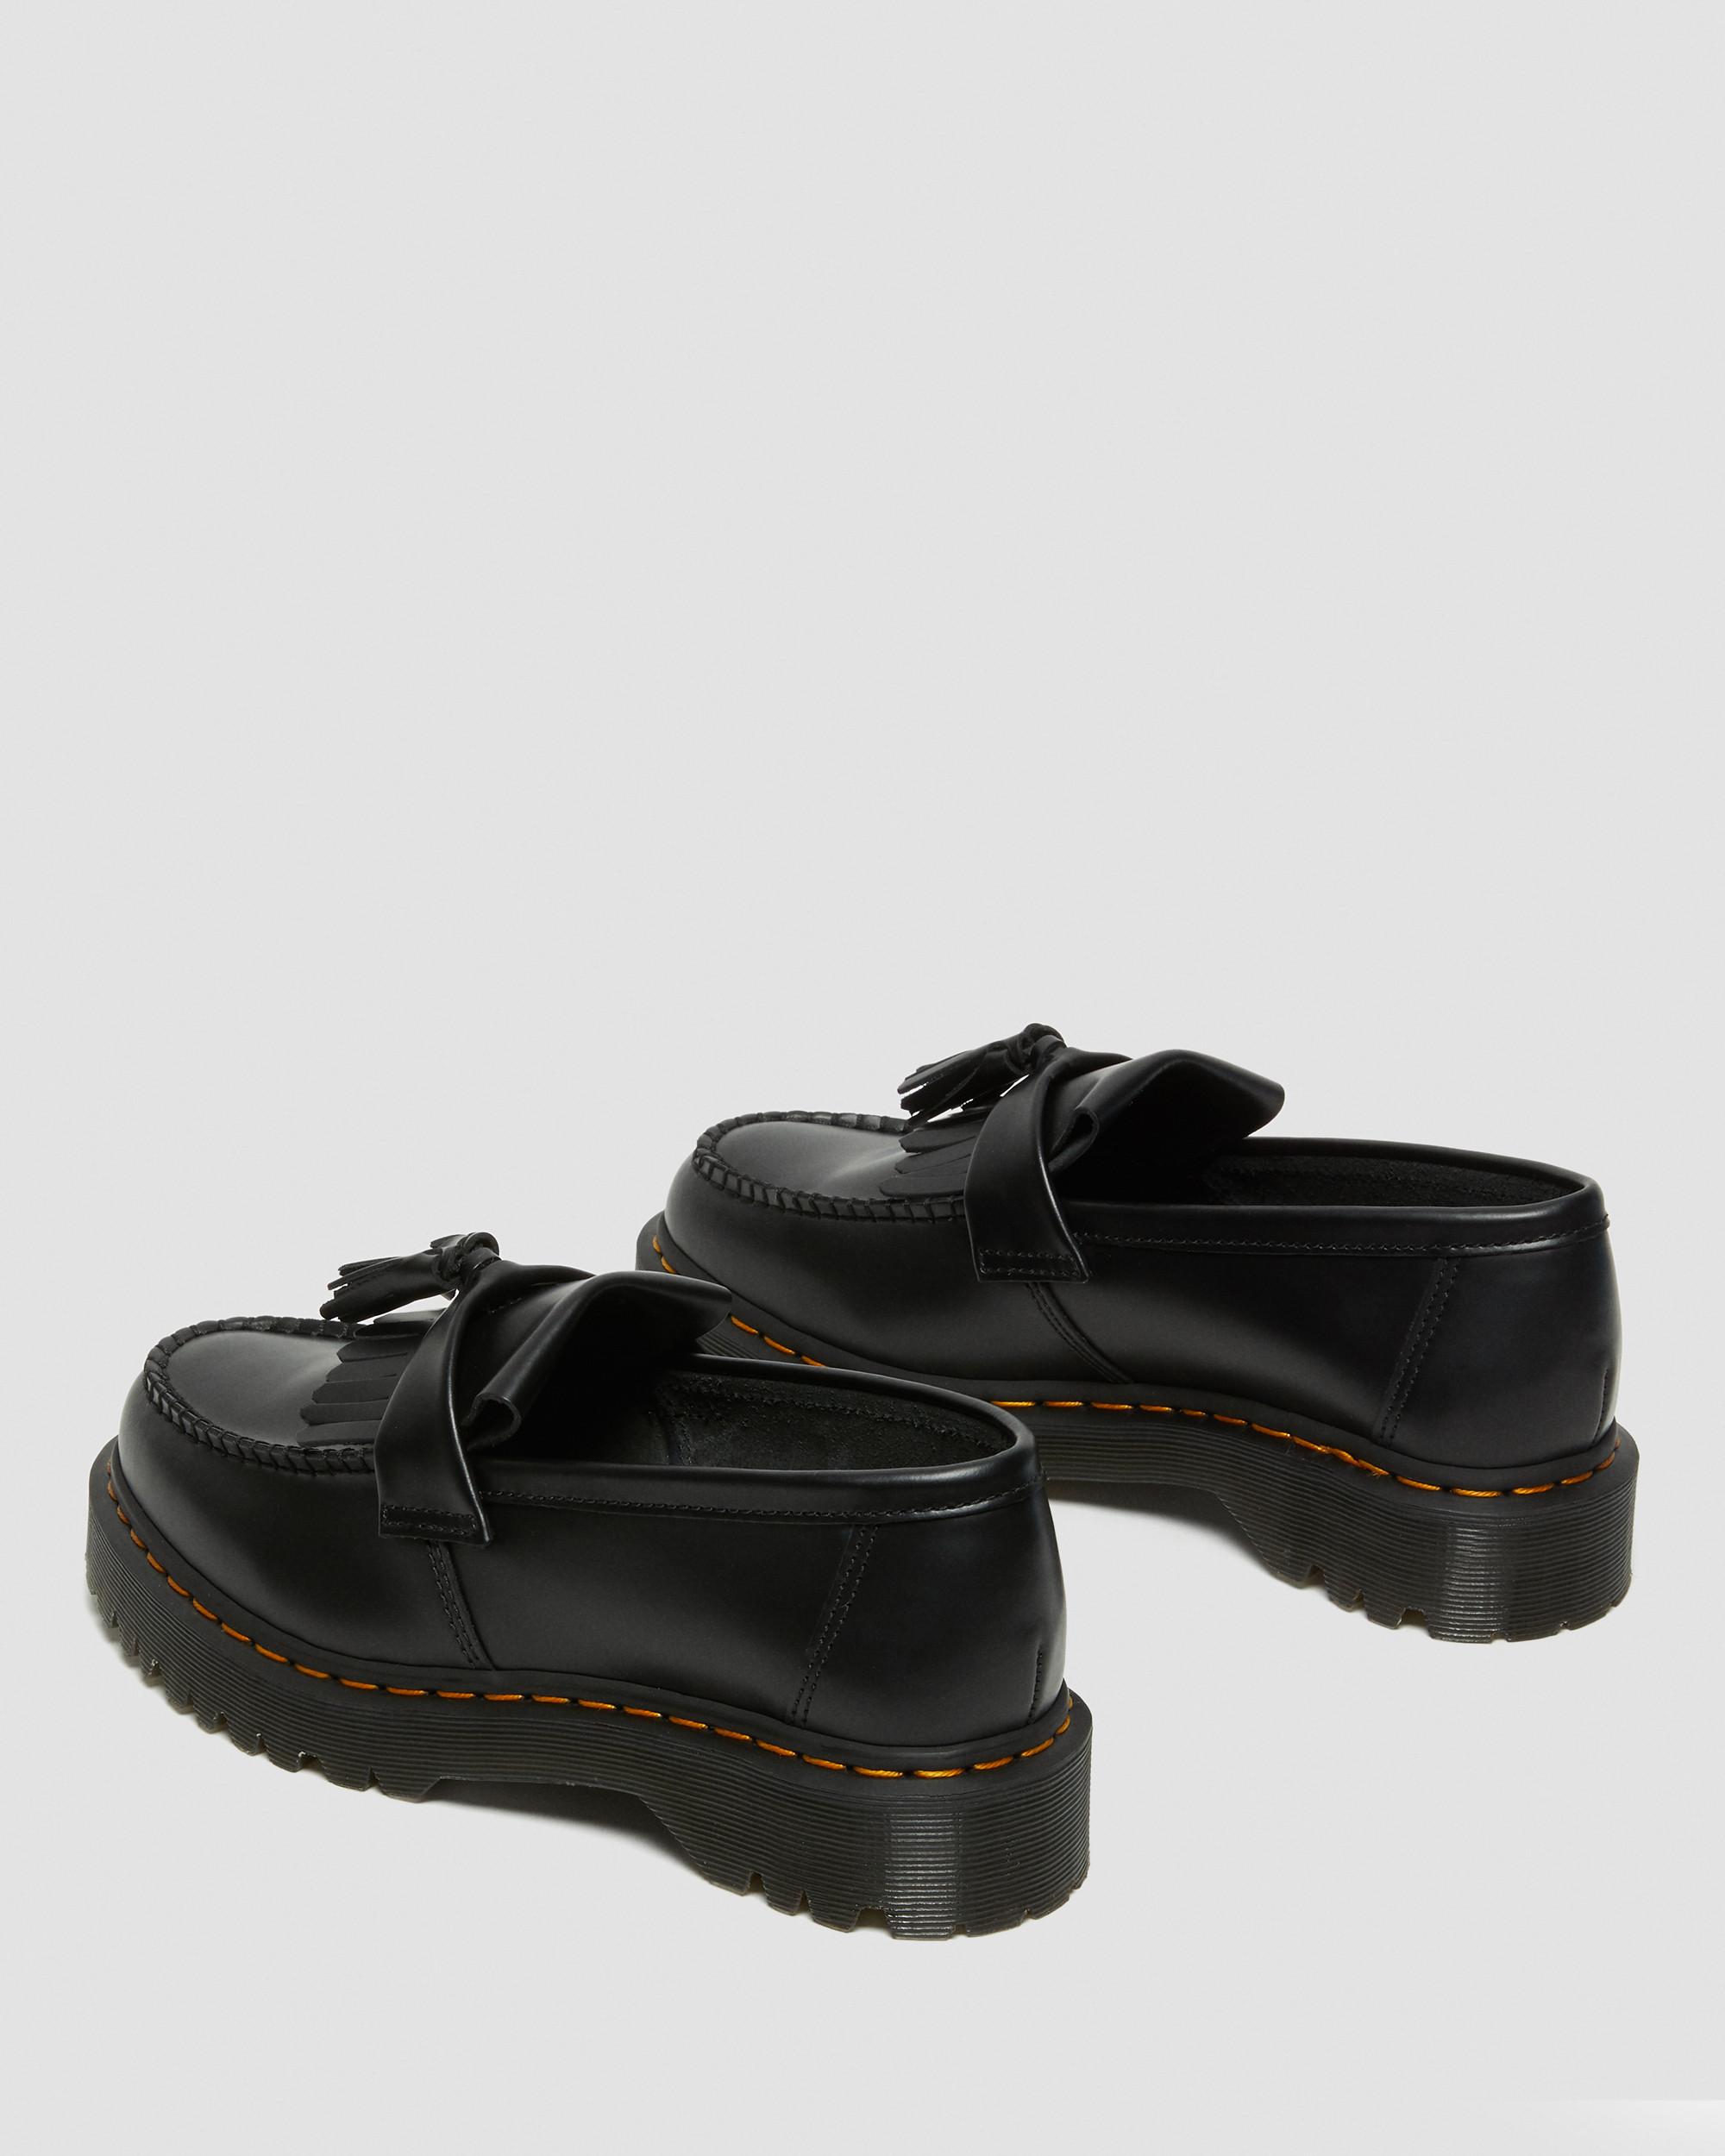 DR MARTENS Adrian Bex Smooth Leather Tassel Loafers